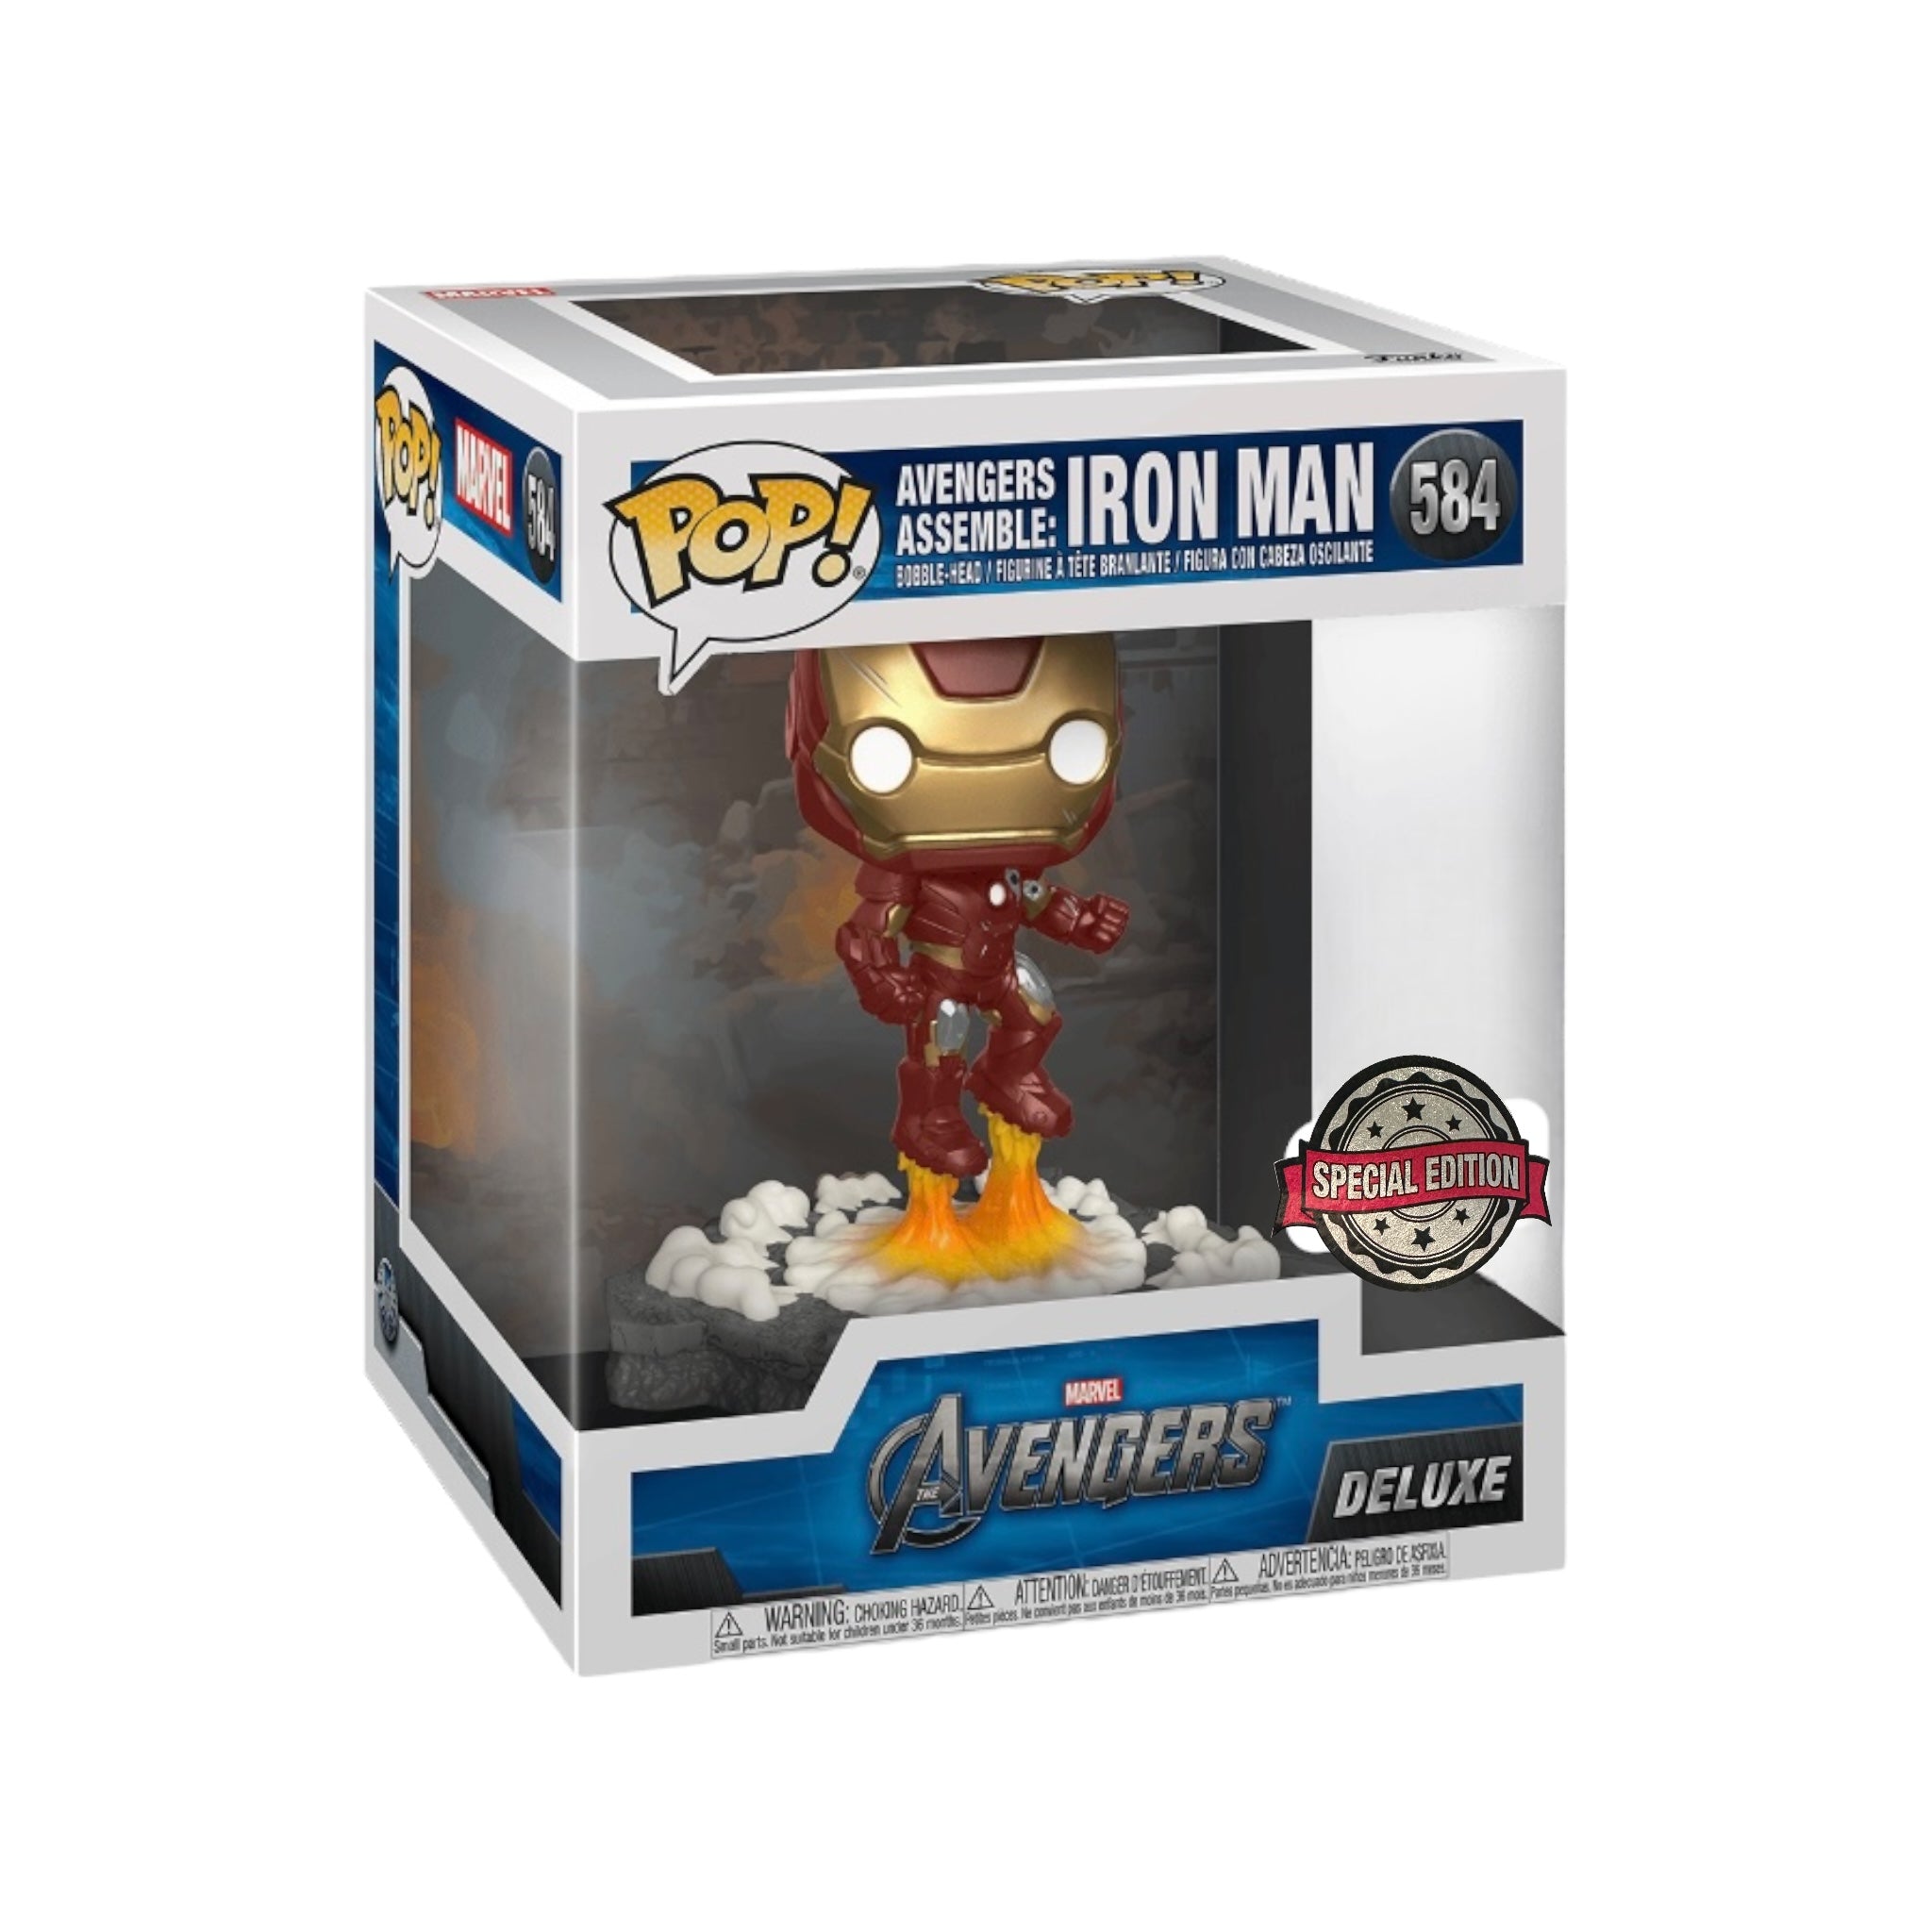 Avengers Assemble: Iron Man #584 Deluxe Funko Pop! - The Avengers - Special Edition - Condition 8/10